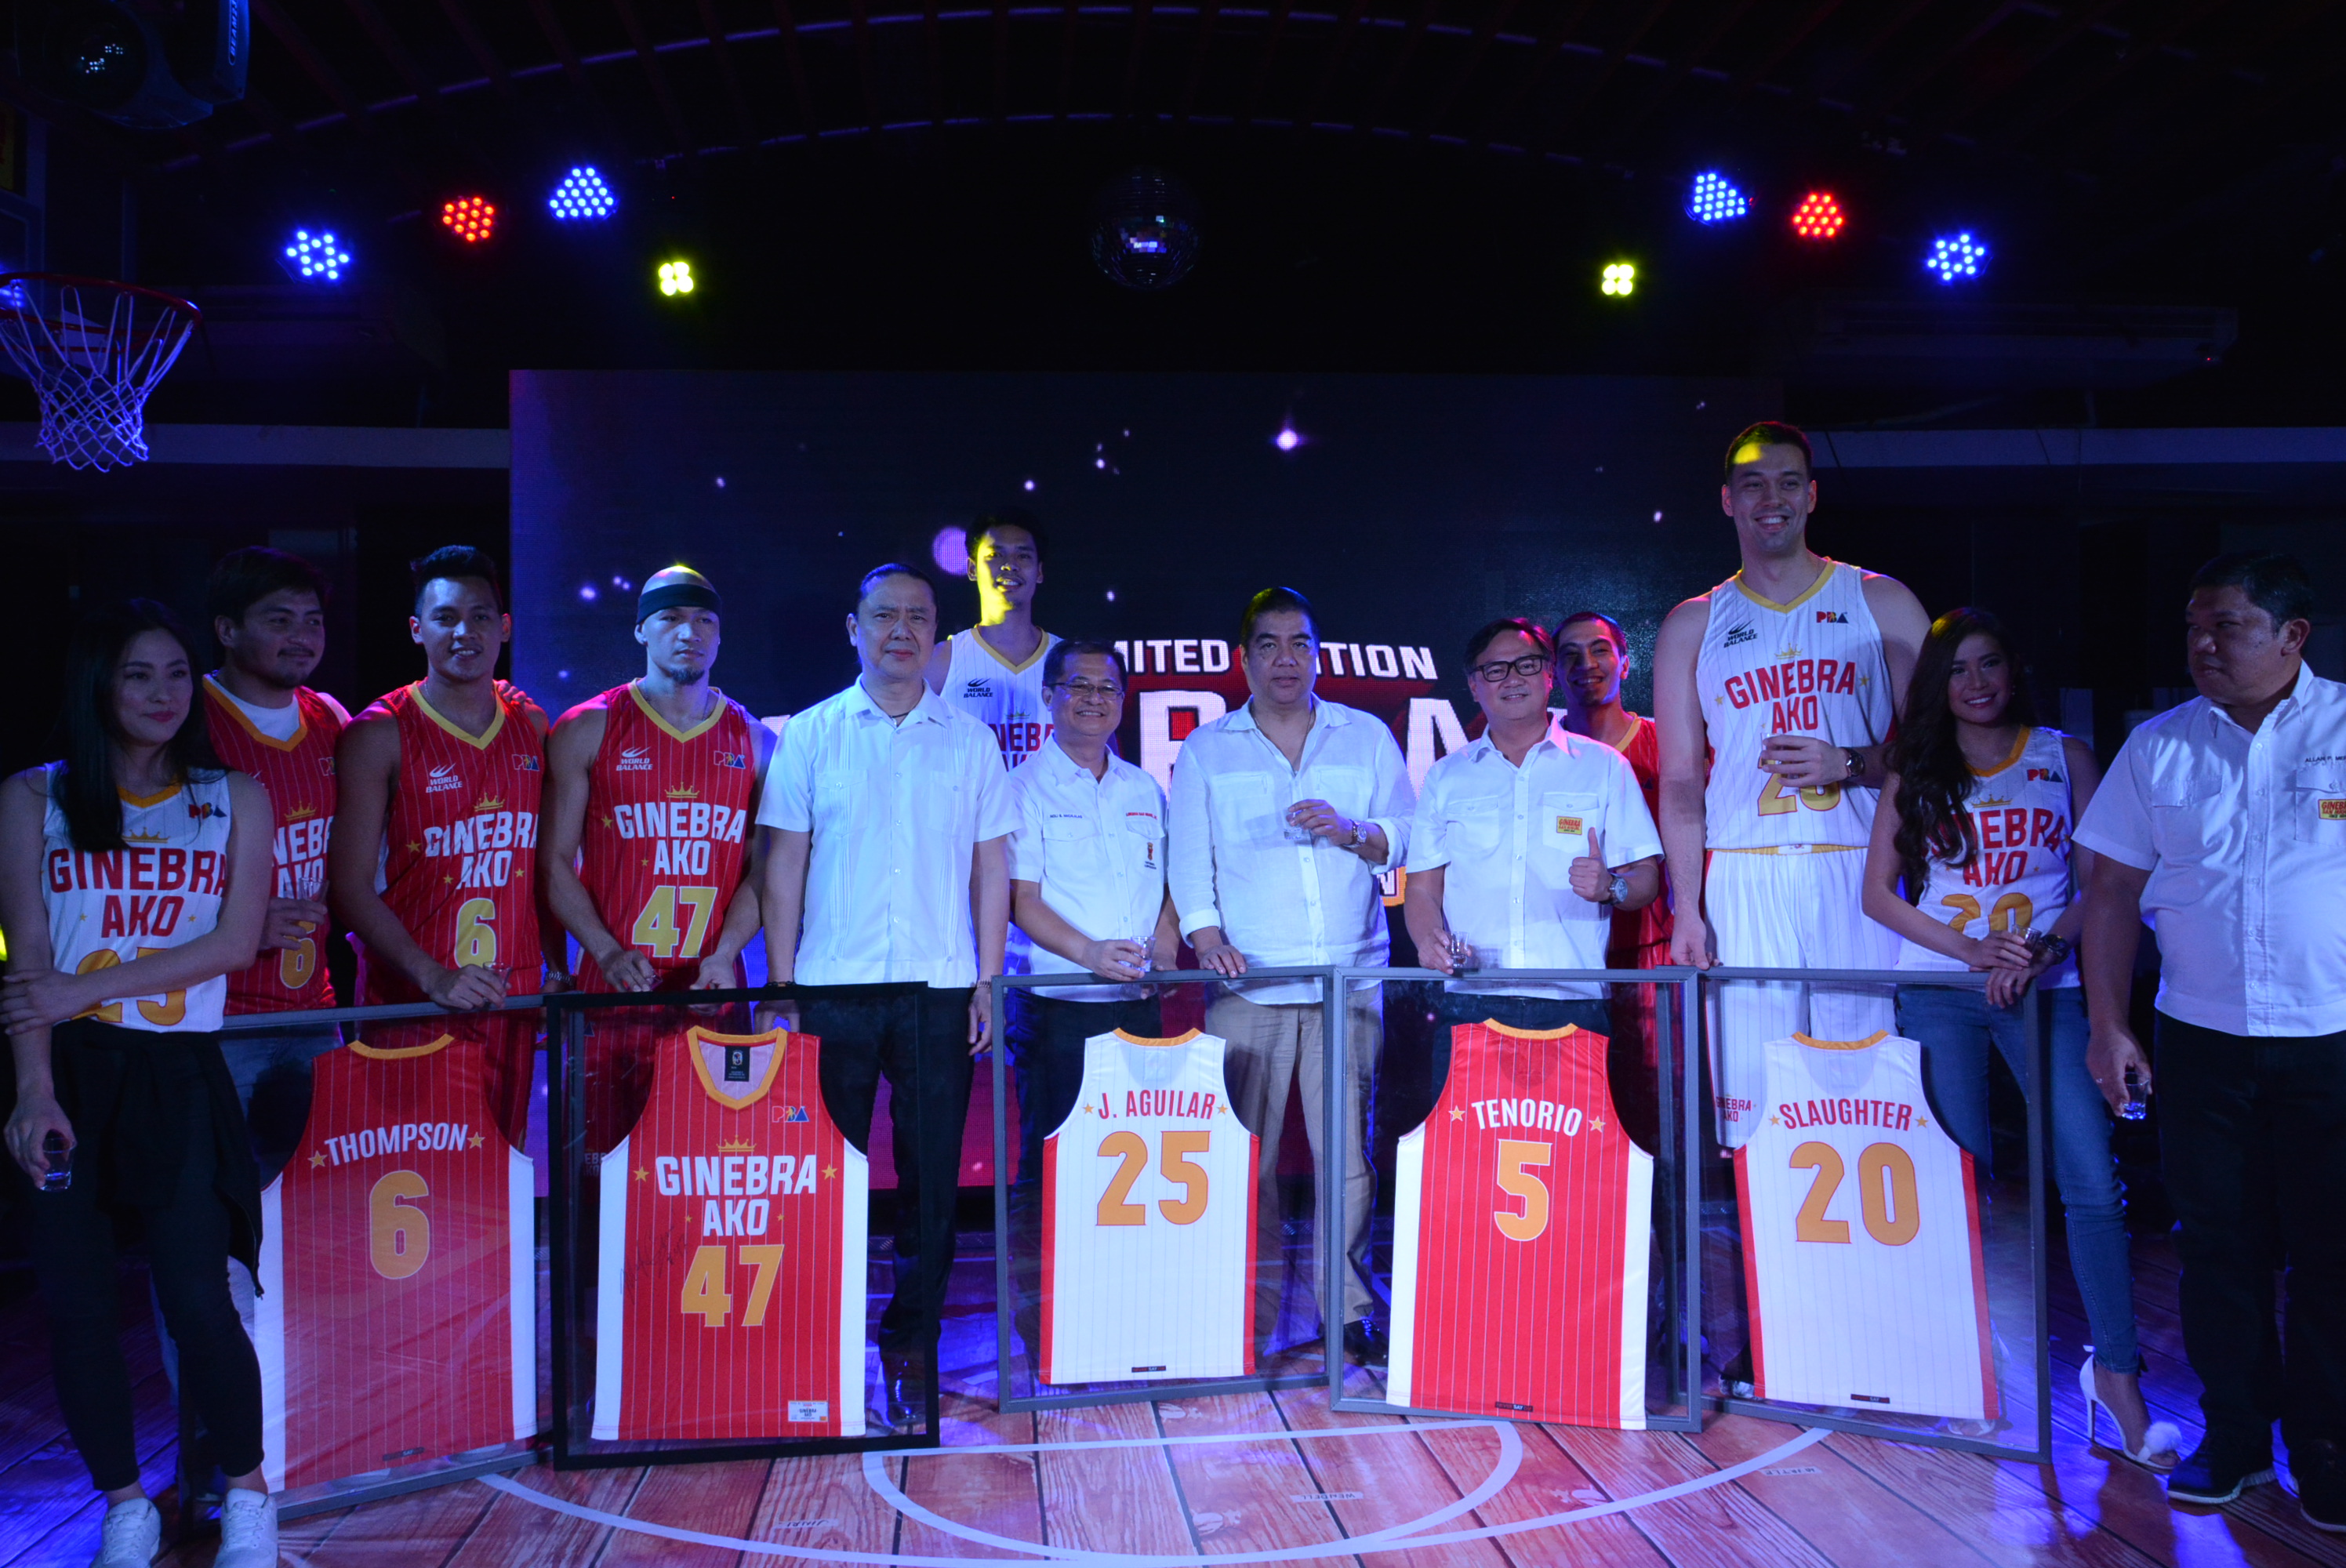 GINEBRA SAN MIGUEL LAUNCHES 2018 LIMITED EDITION GINEBRA AKO JERSEY COLLECTION